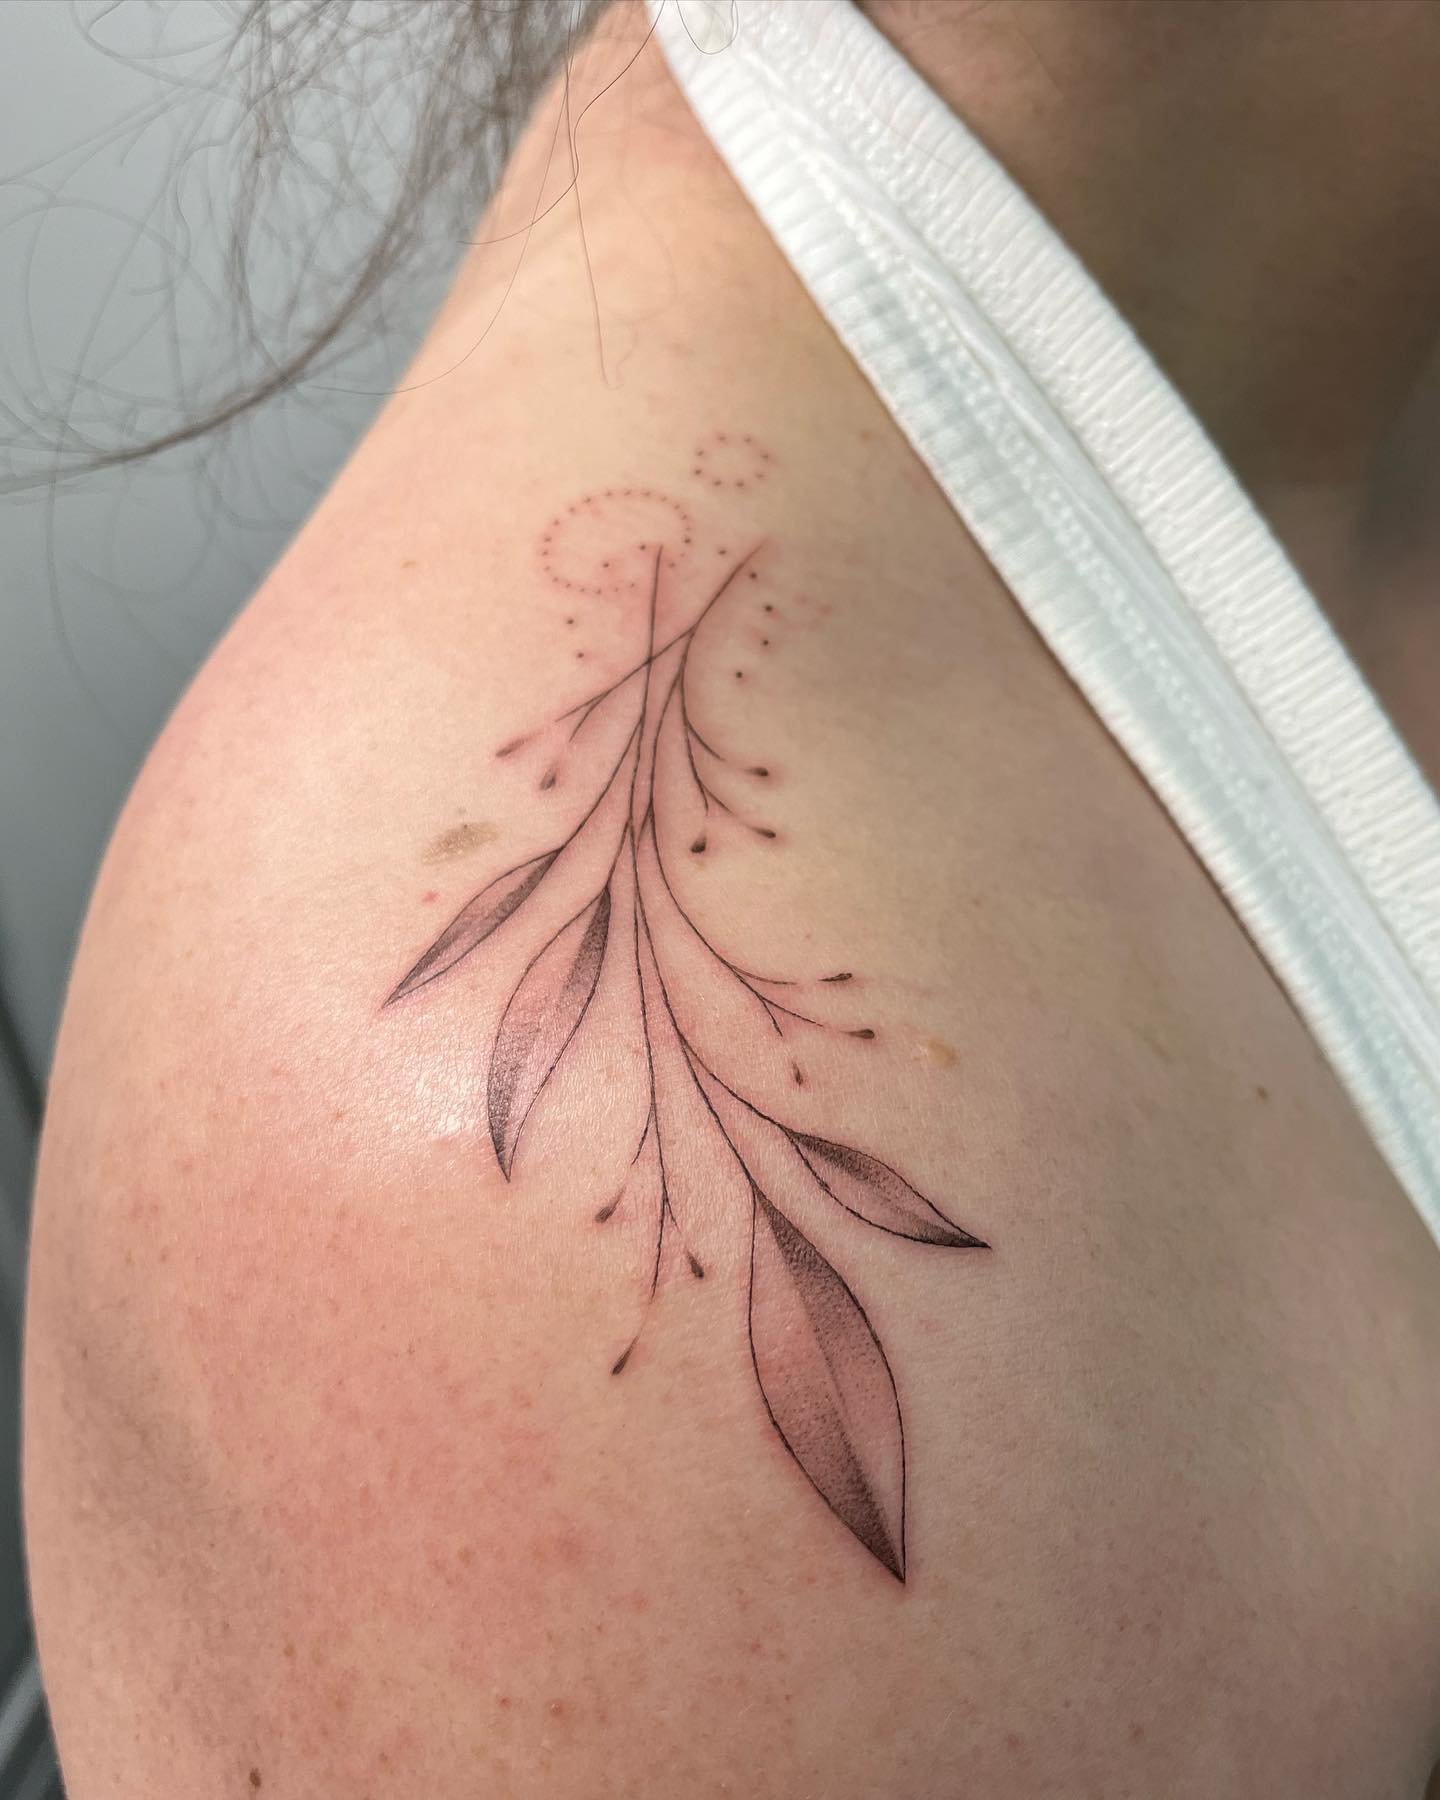 sometimes the most beautiful tattoos are the most difficult to photograph 🥲🩵🌱 these top of the shoulder branches are so lovely and delicate! please excuse my horrendous photography skills and let your imagination show the perfect peeks of leaves a